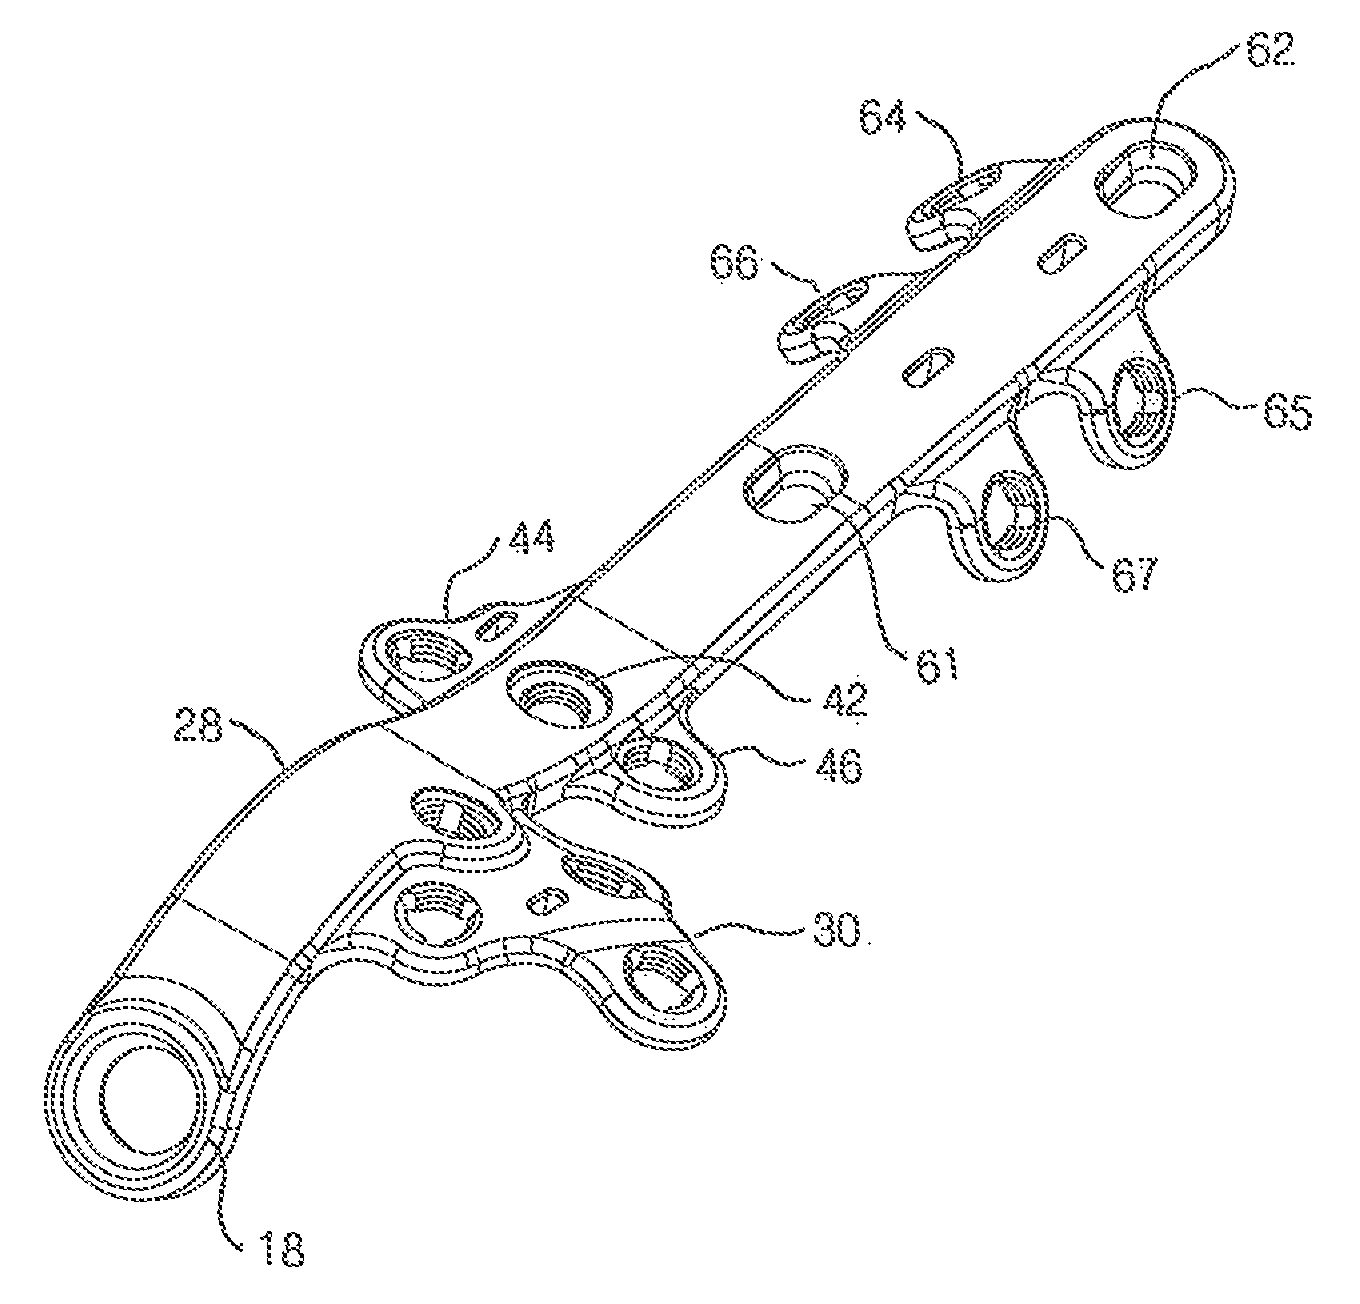 Lateral ankle fusion plate system and jig, and method for use therewith